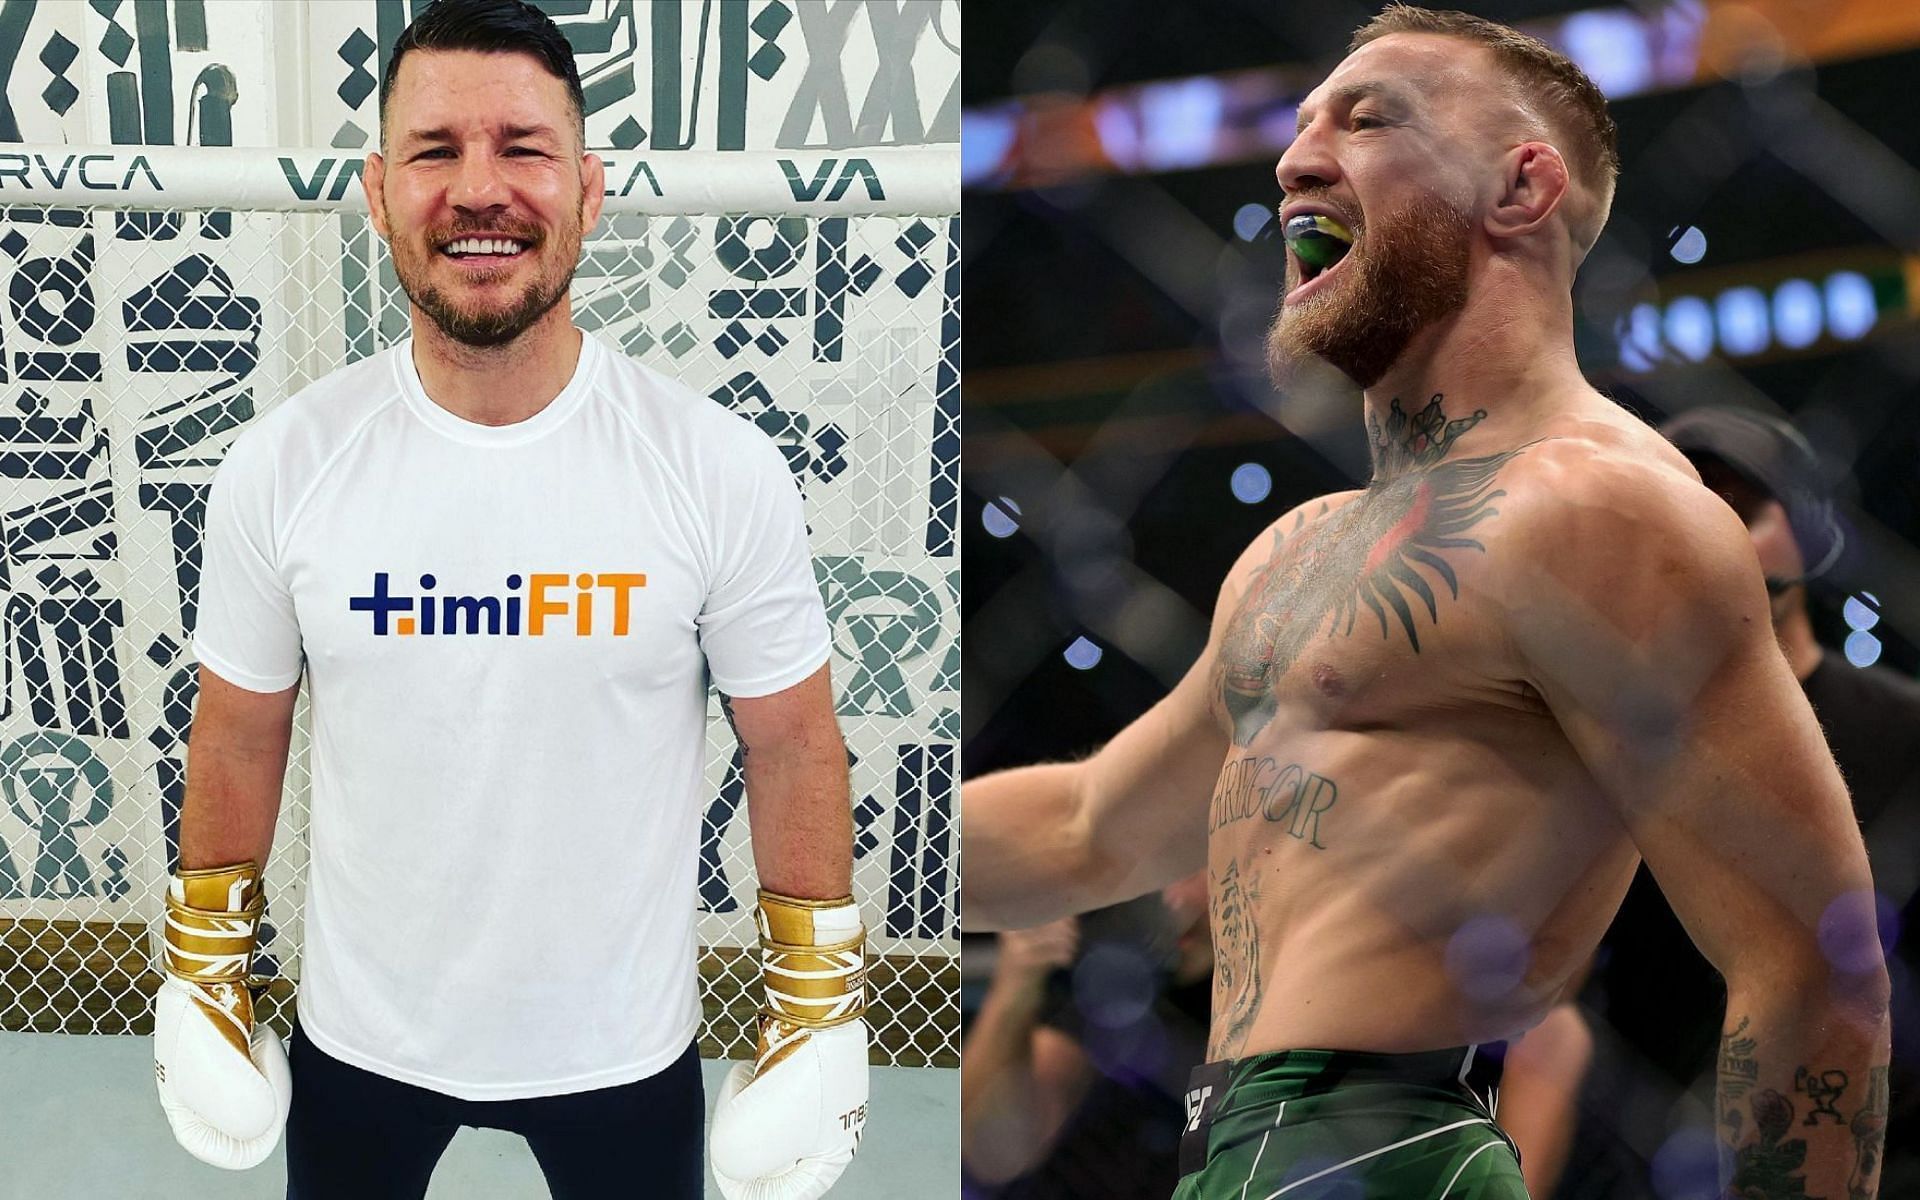 Michael Bisping (left) and Conor McGregor (right) [Image credits: @mikebisping on Instagram]